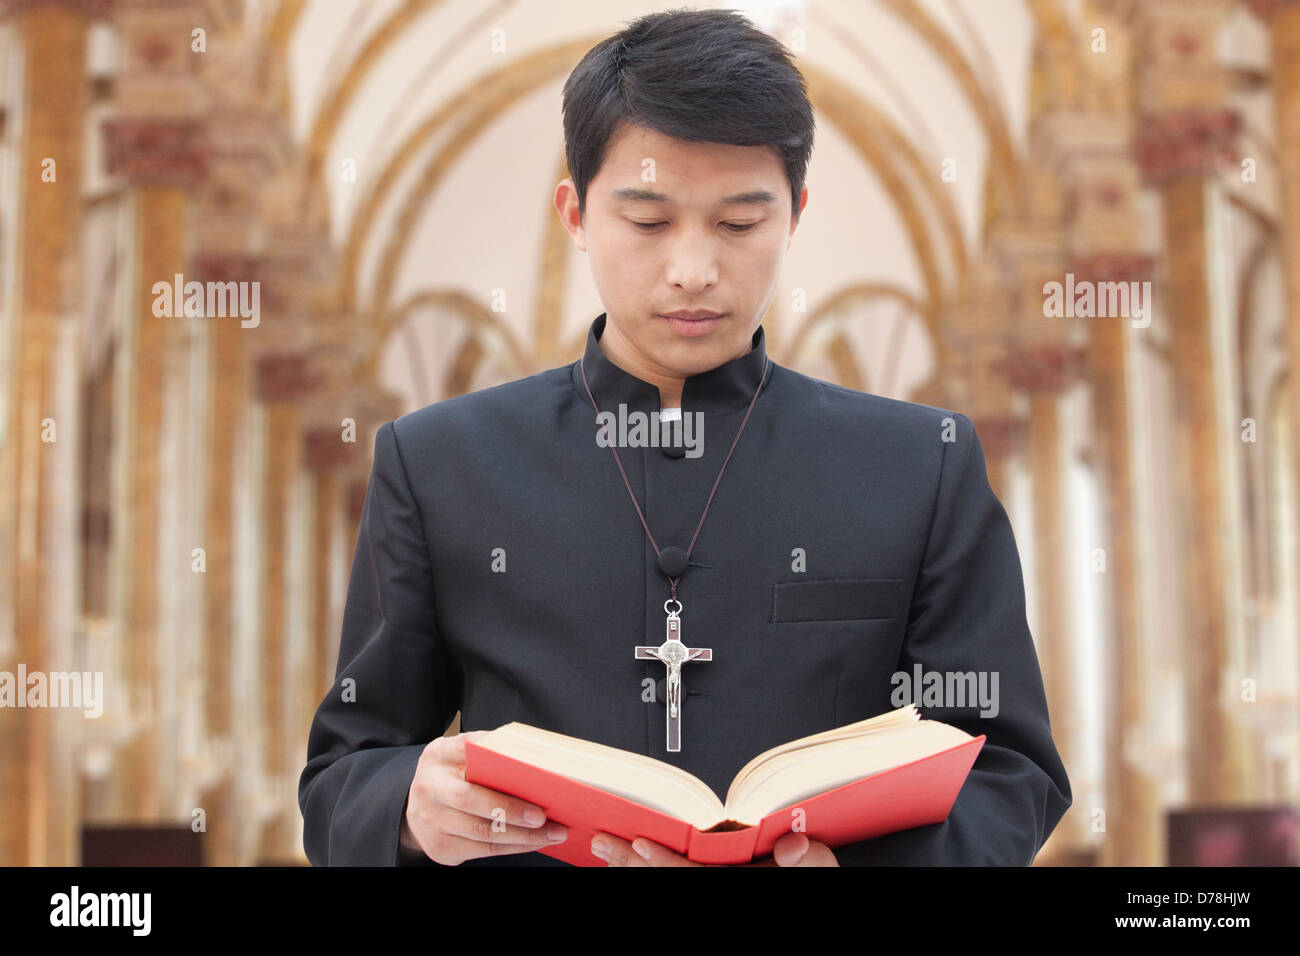 Priest Looking at Bible in a Church Stock Photo